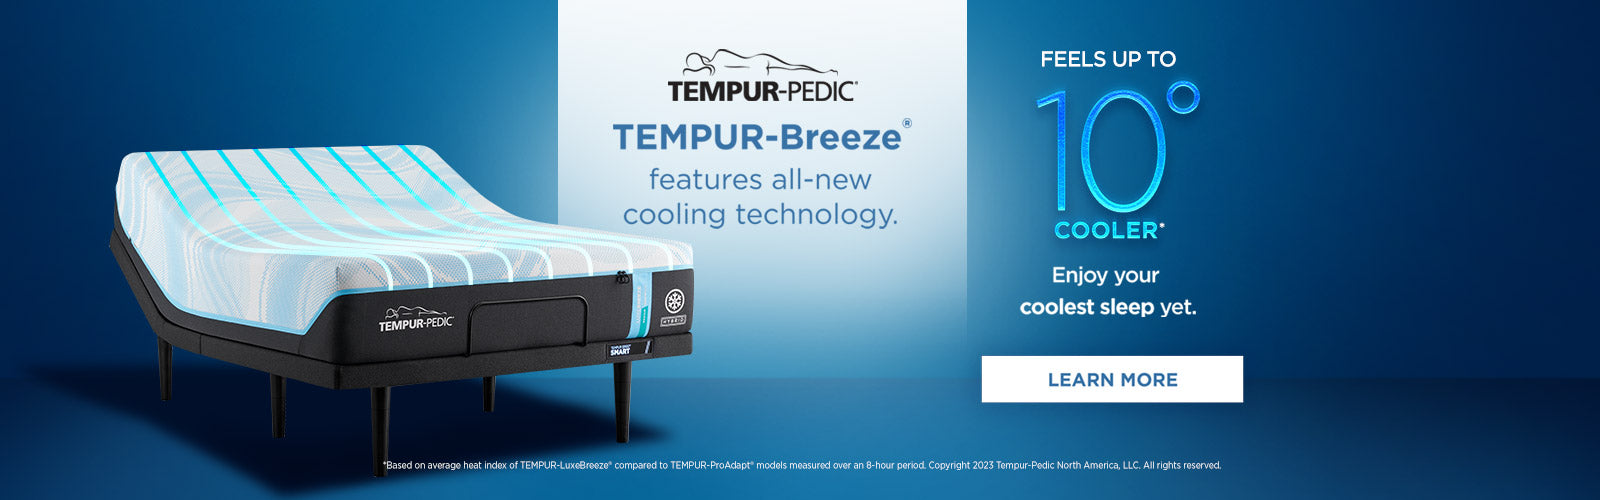 Tempur-Pedic Tempur-Breeze with all new cooling technology